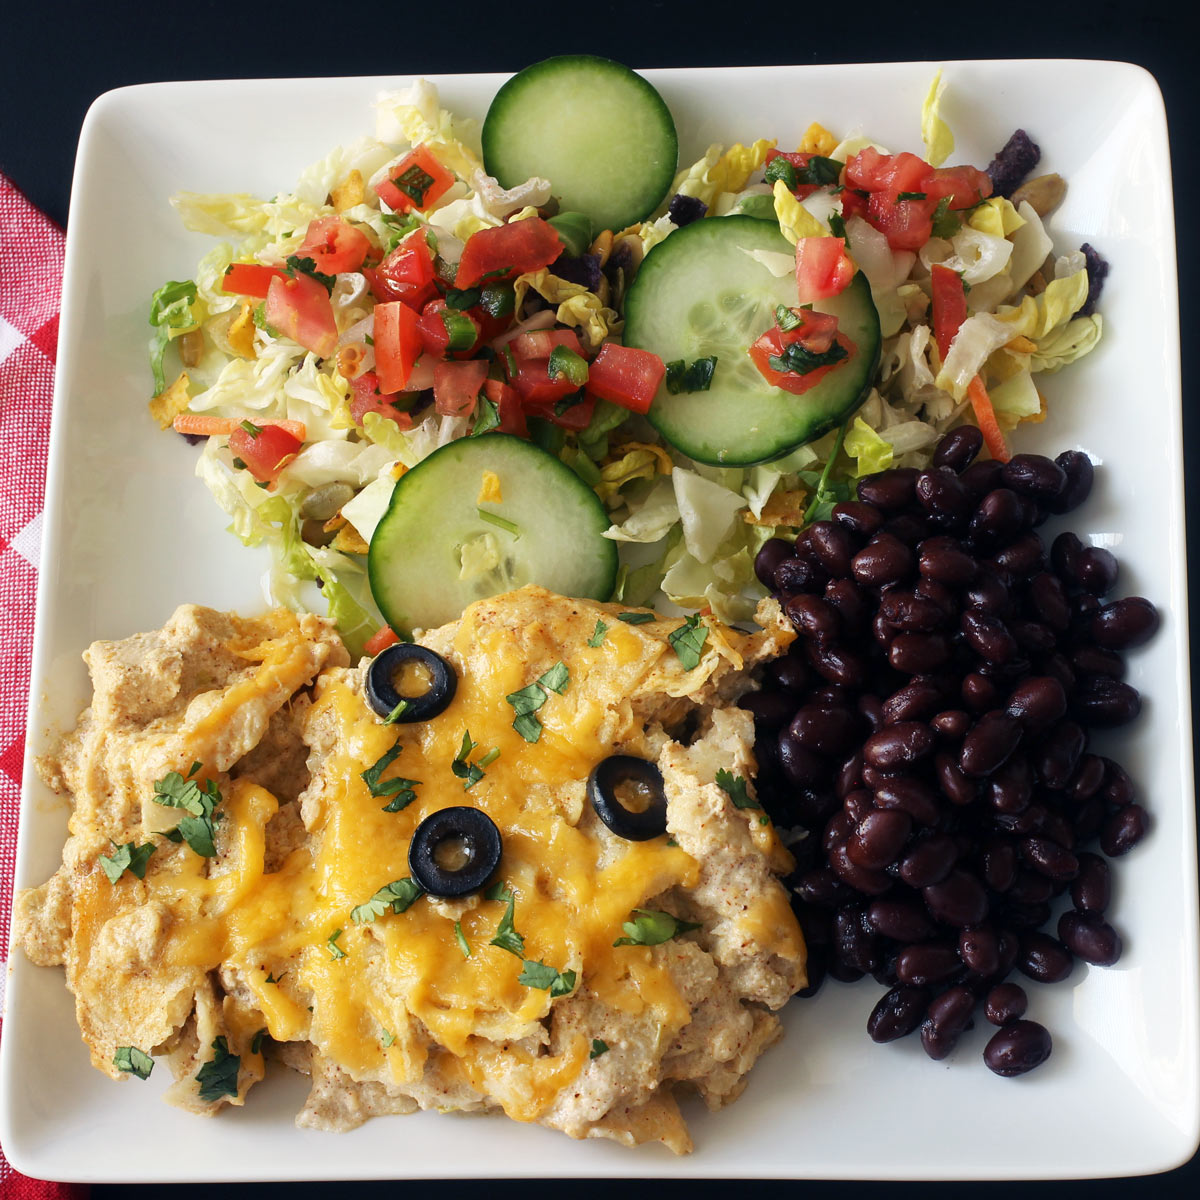 chicken enchilada bake on plate with side dishes.